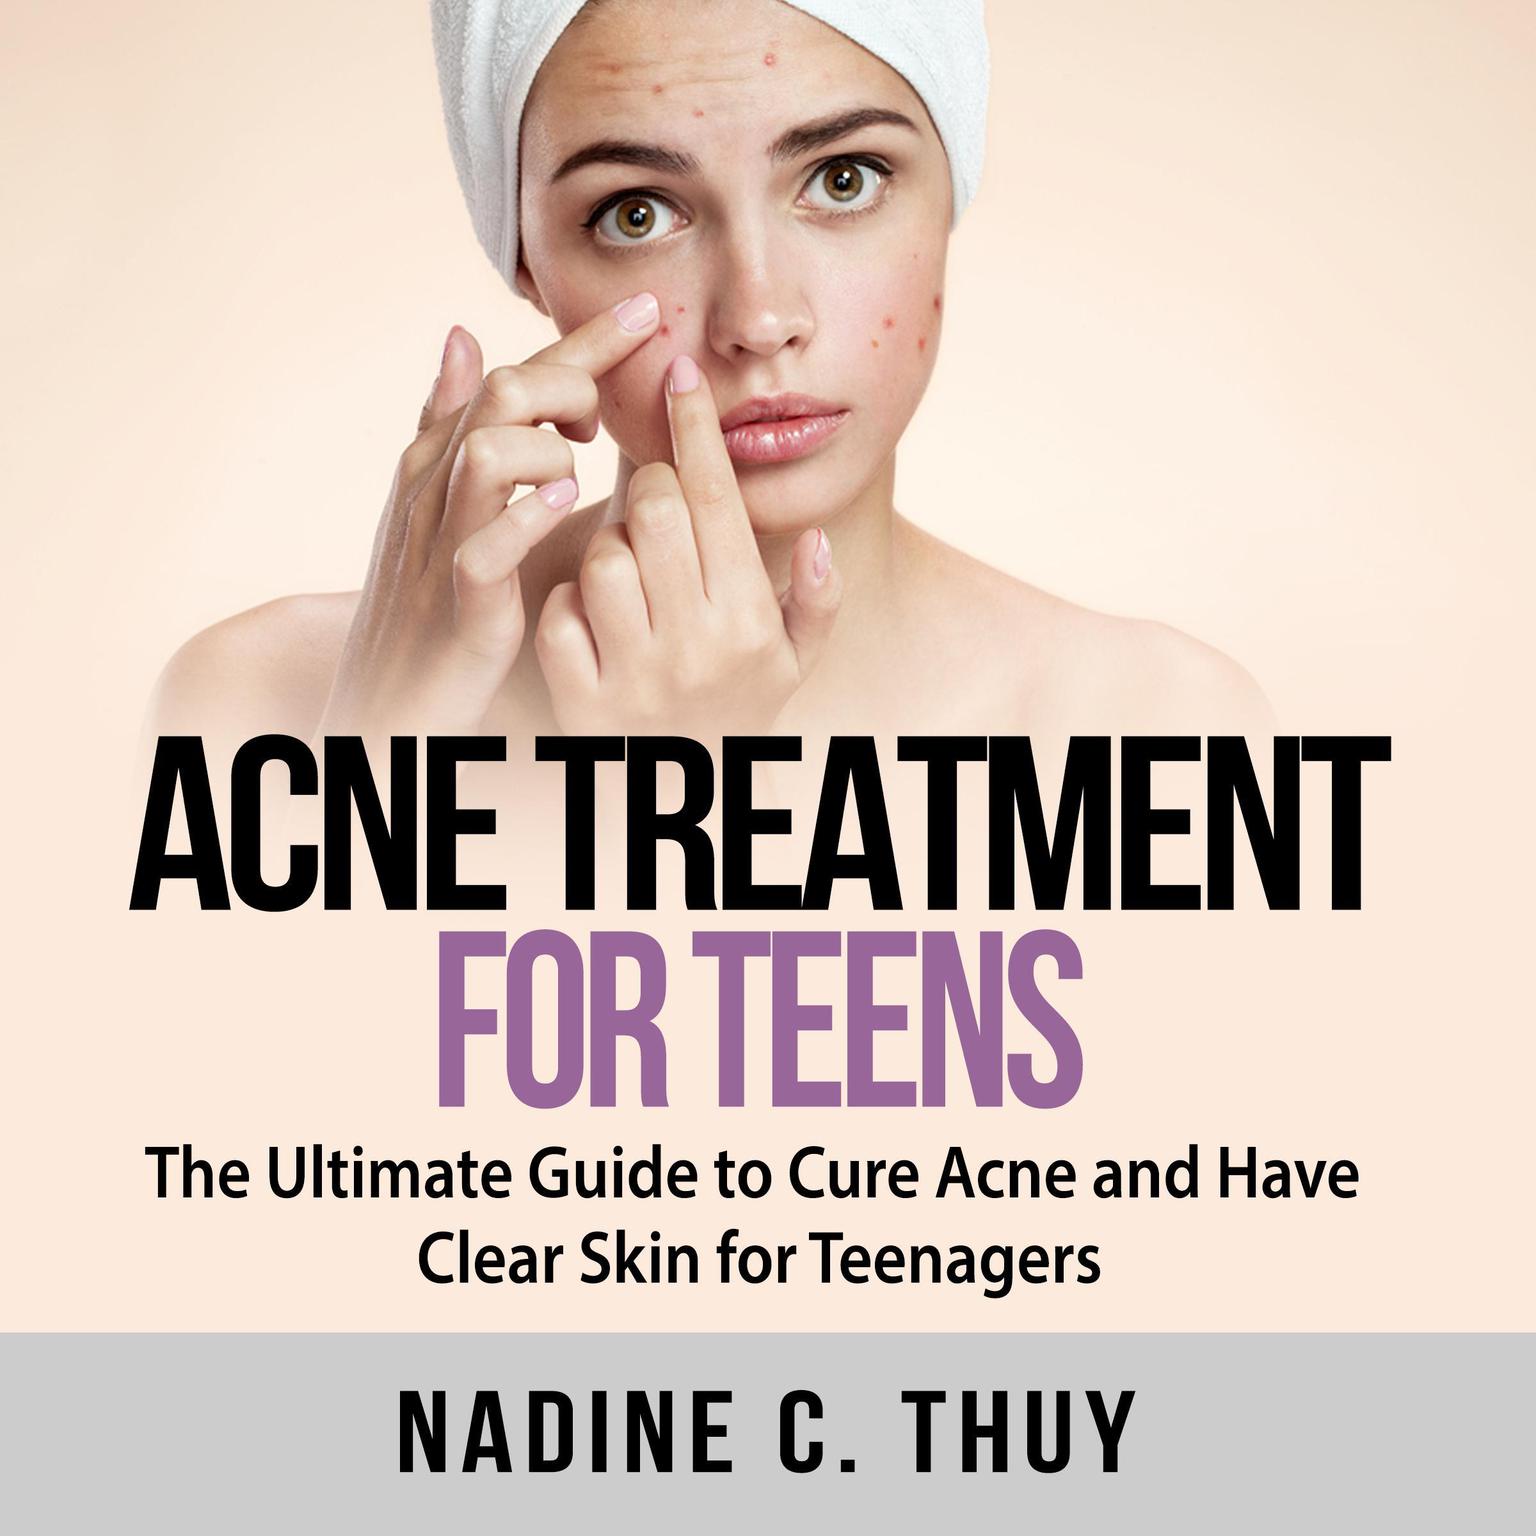 Acne Treatment for Teens: The Ultimate Guide to Cure Acne and Have Clear Skin for Teenagers Audiobook, by Nadine C. Thuy